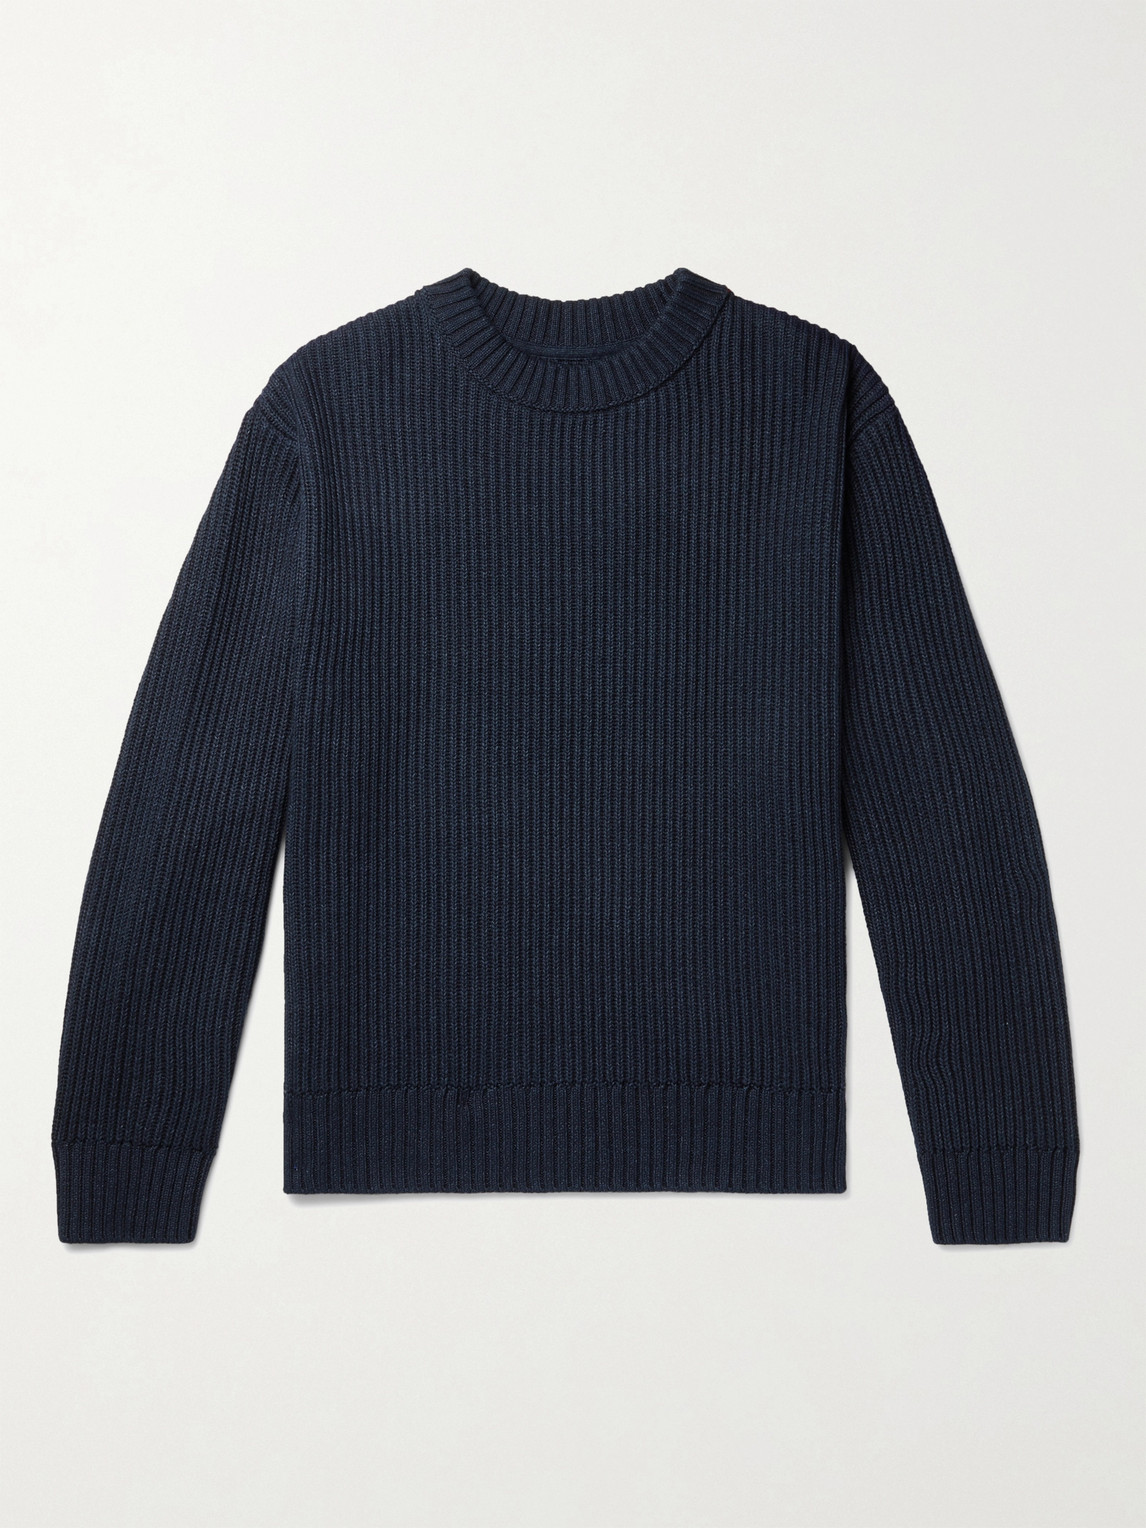 NUDIE JEANS FRANK INDIGO-DYED RIBBED ORGANIC COTTON SWEATER